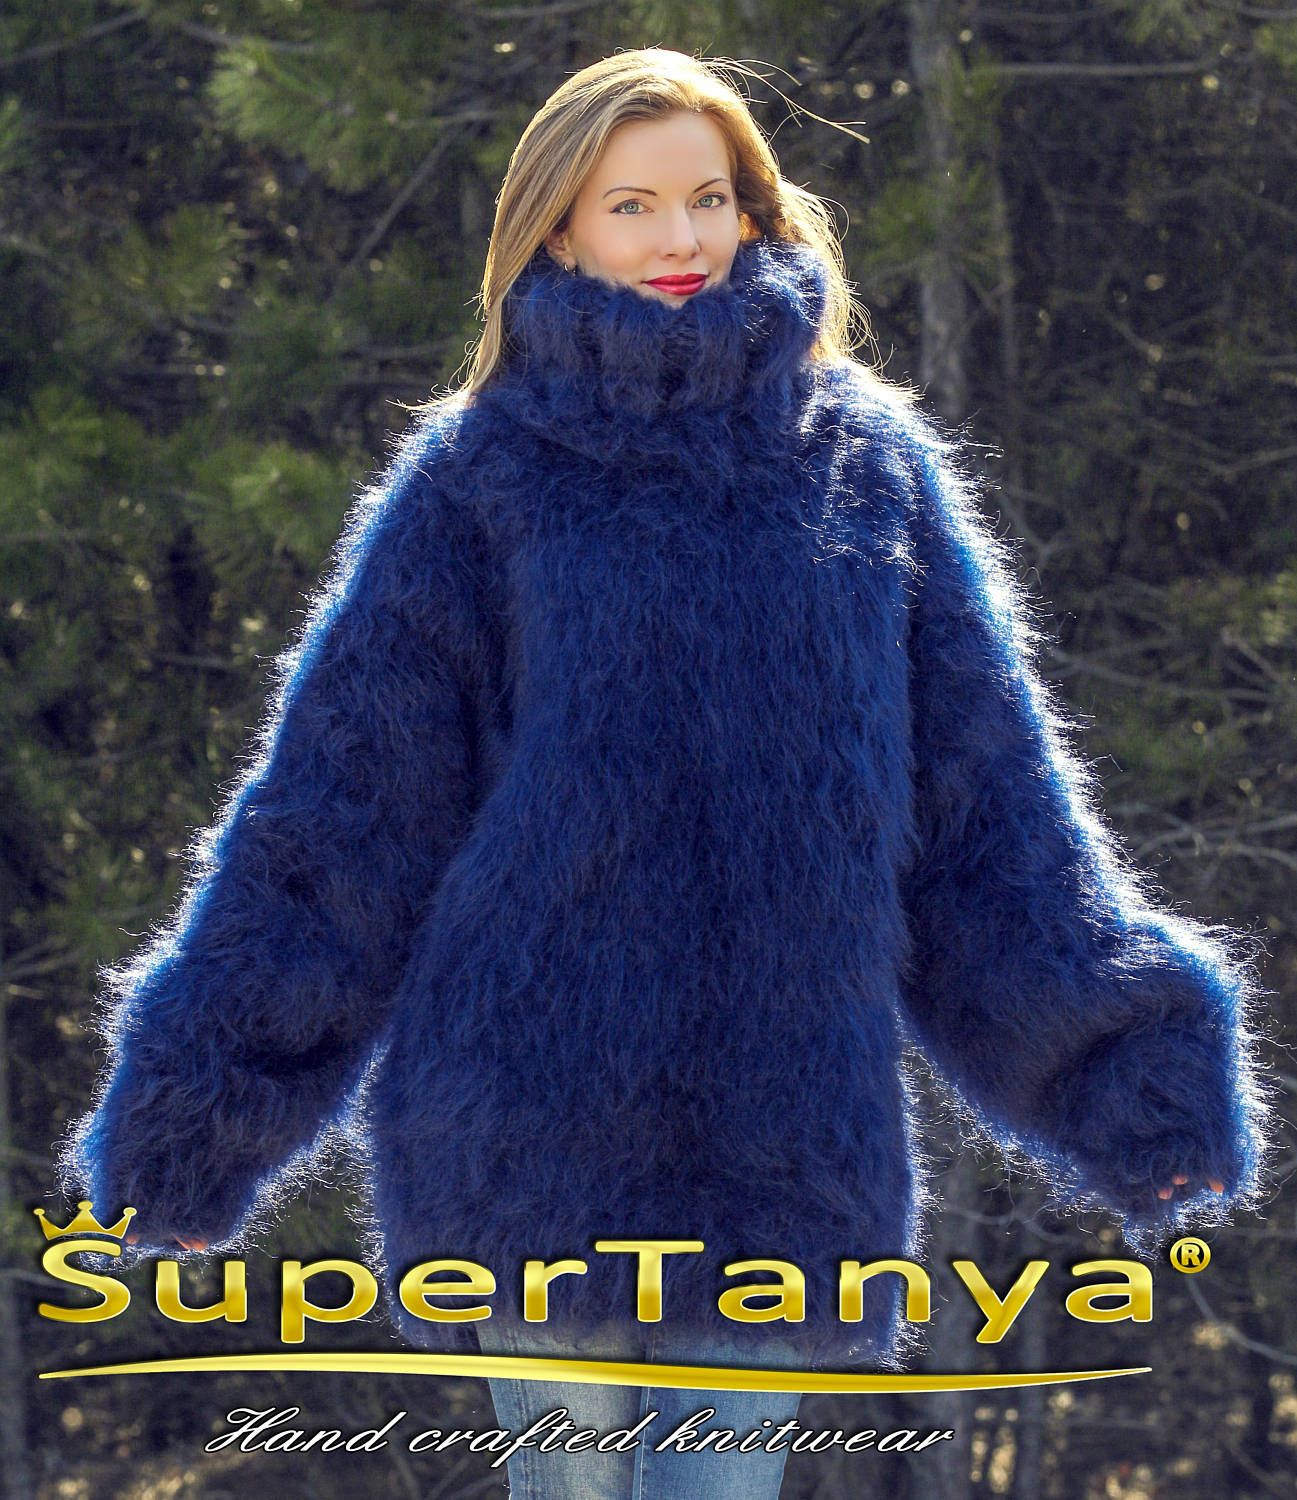 Mega thick and heavy mohair sweater, unisex handgestrickte pullover 10 strands blue mohair by SuperTanya